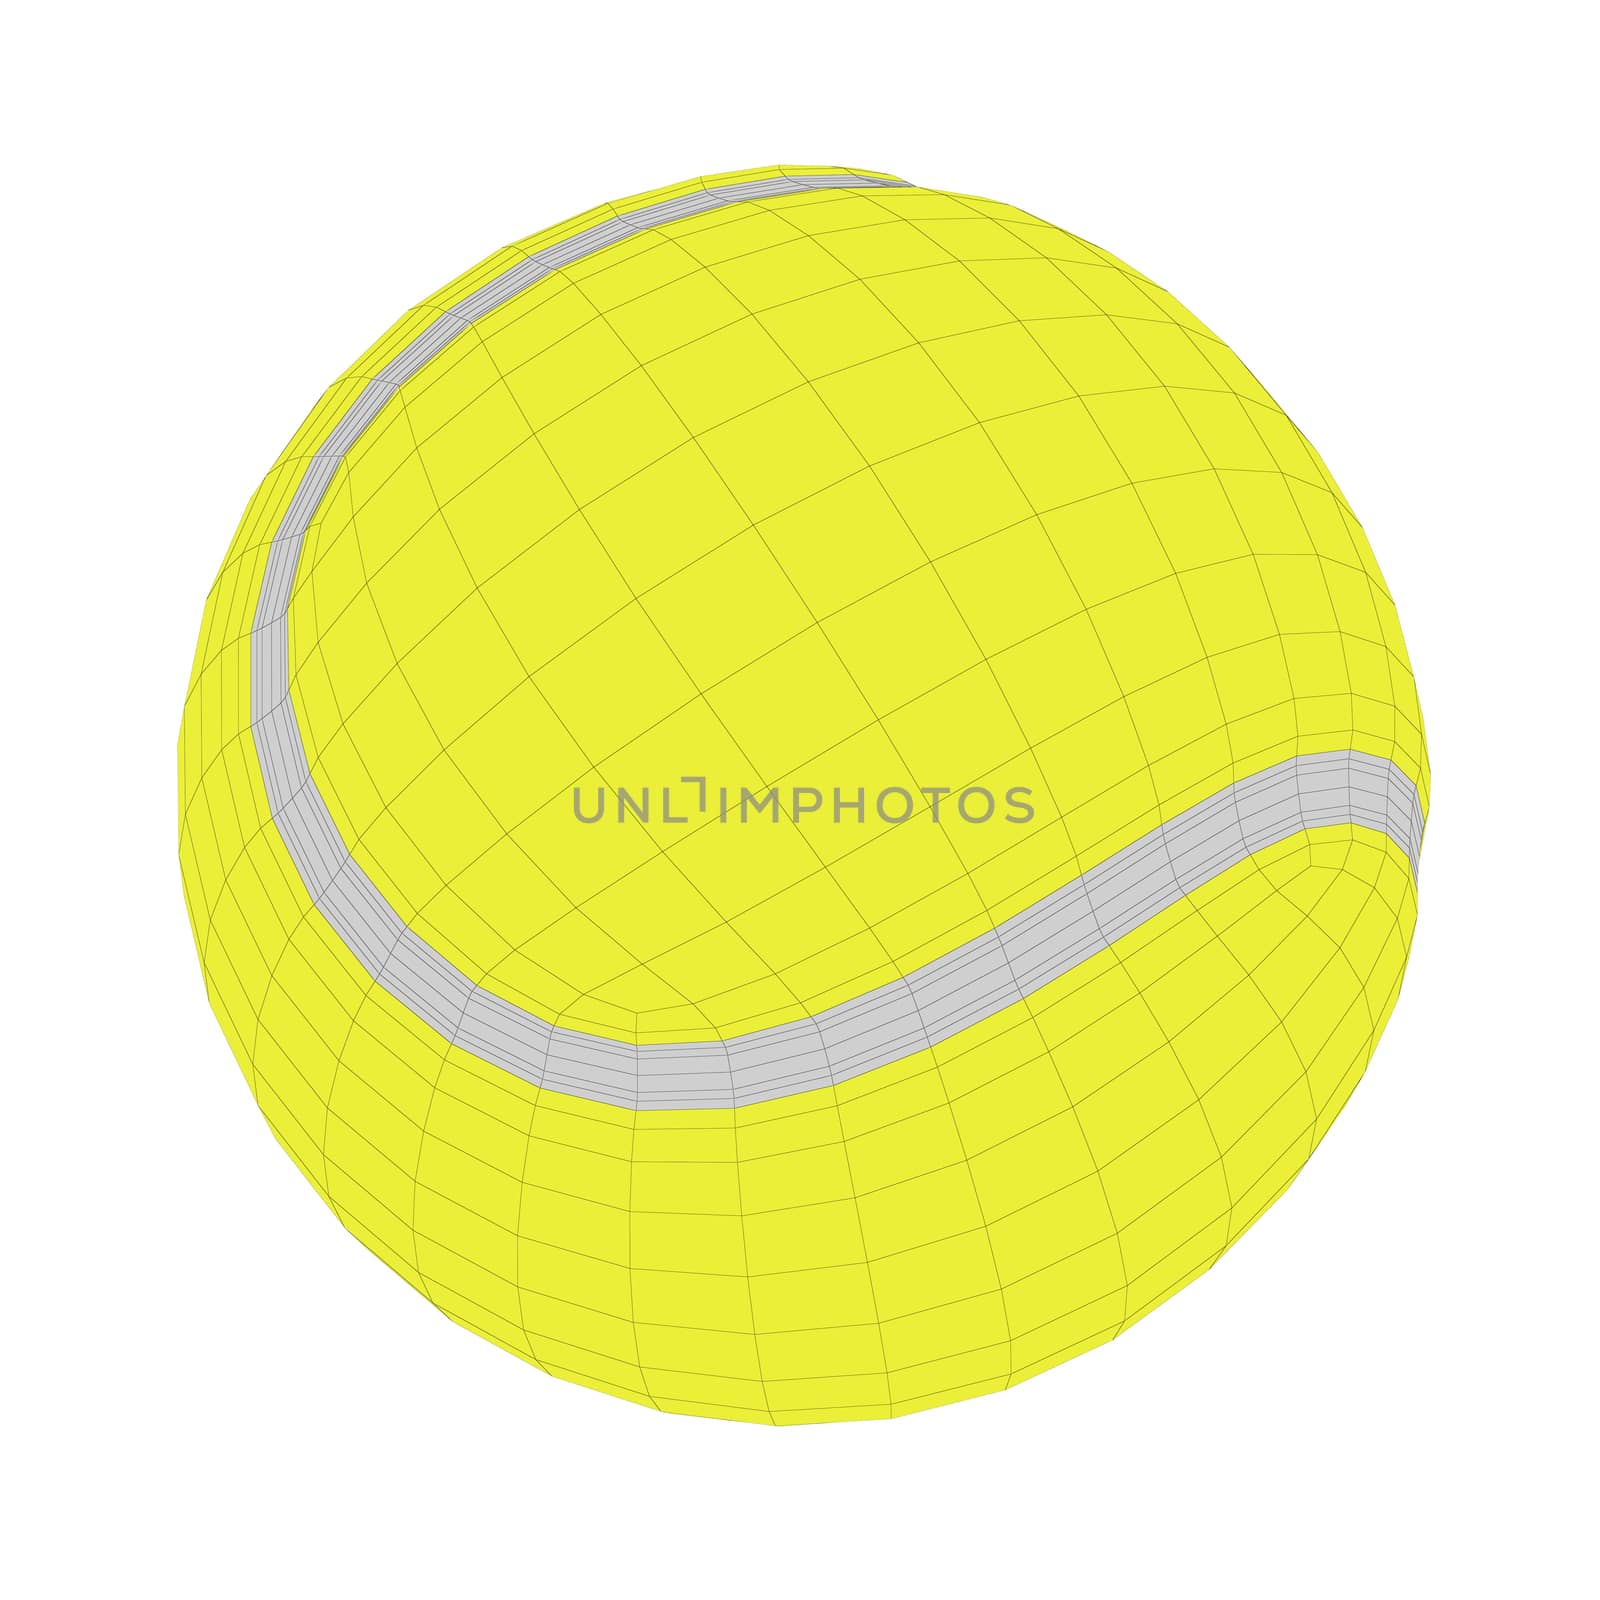 3D wire-frame model of tennis ball on white background